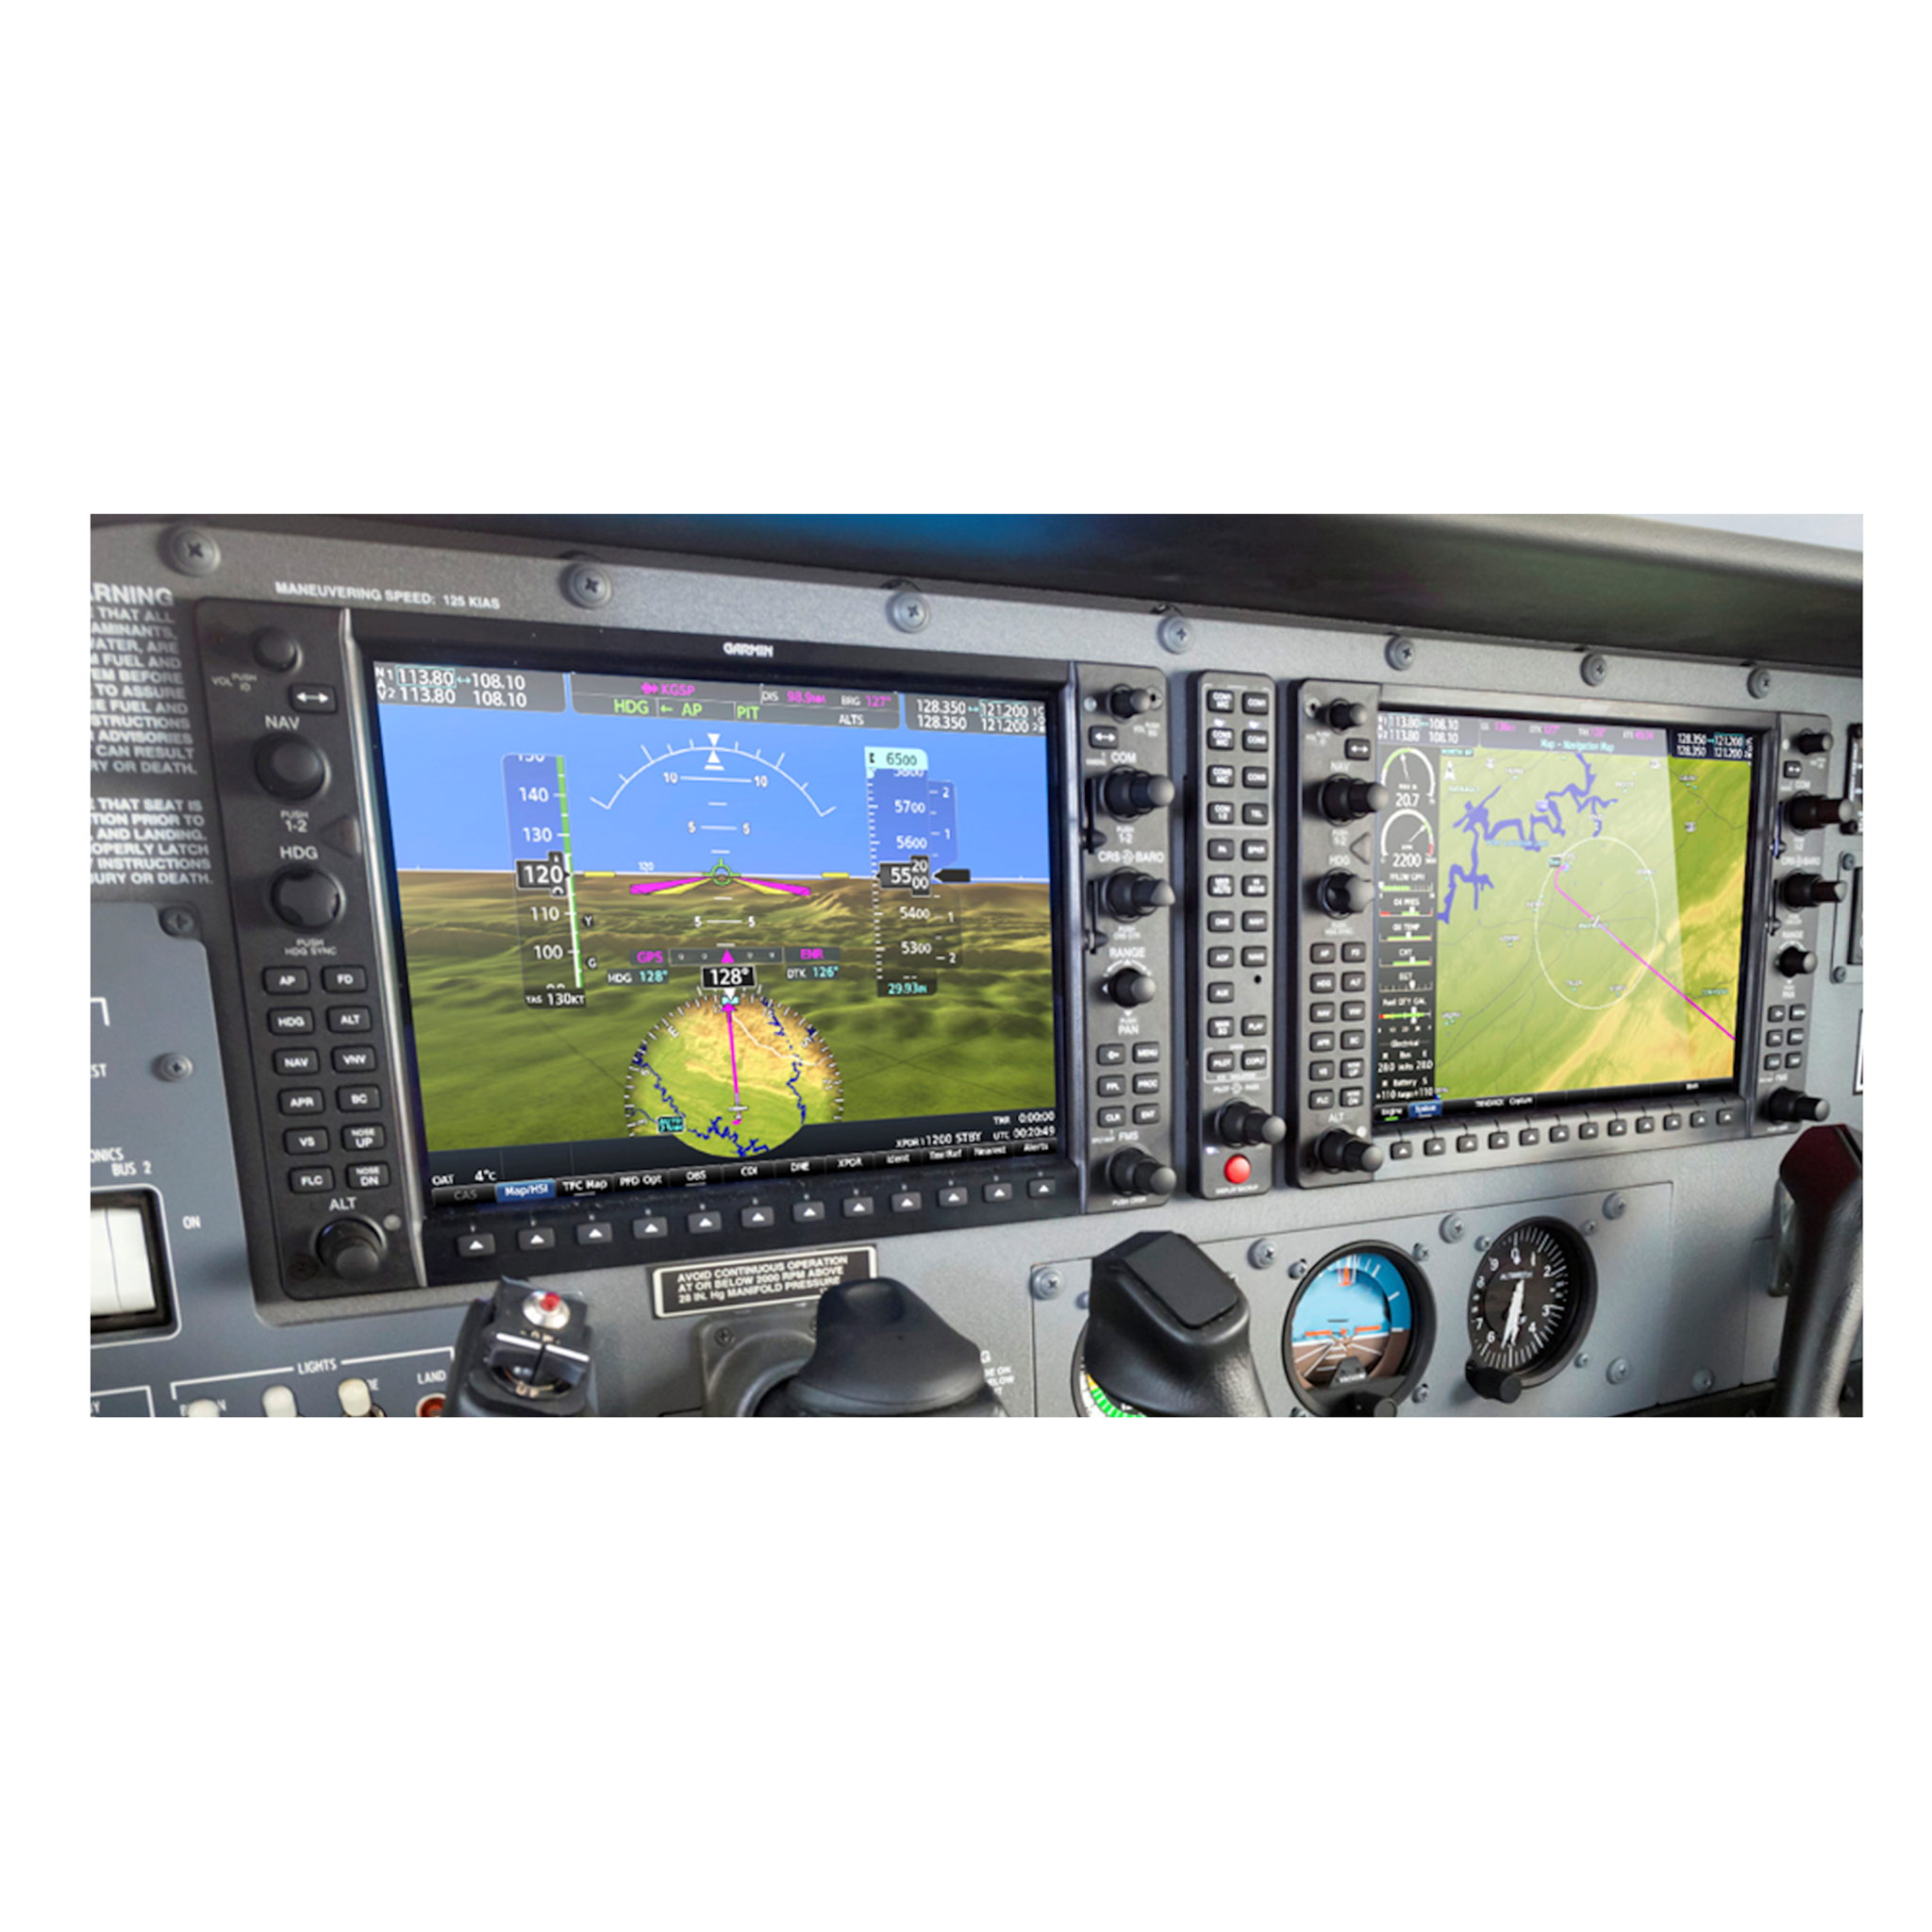 Picture of G1000® to G1000® NXi Upgrade for Cessna T206H Turbo Stationair 